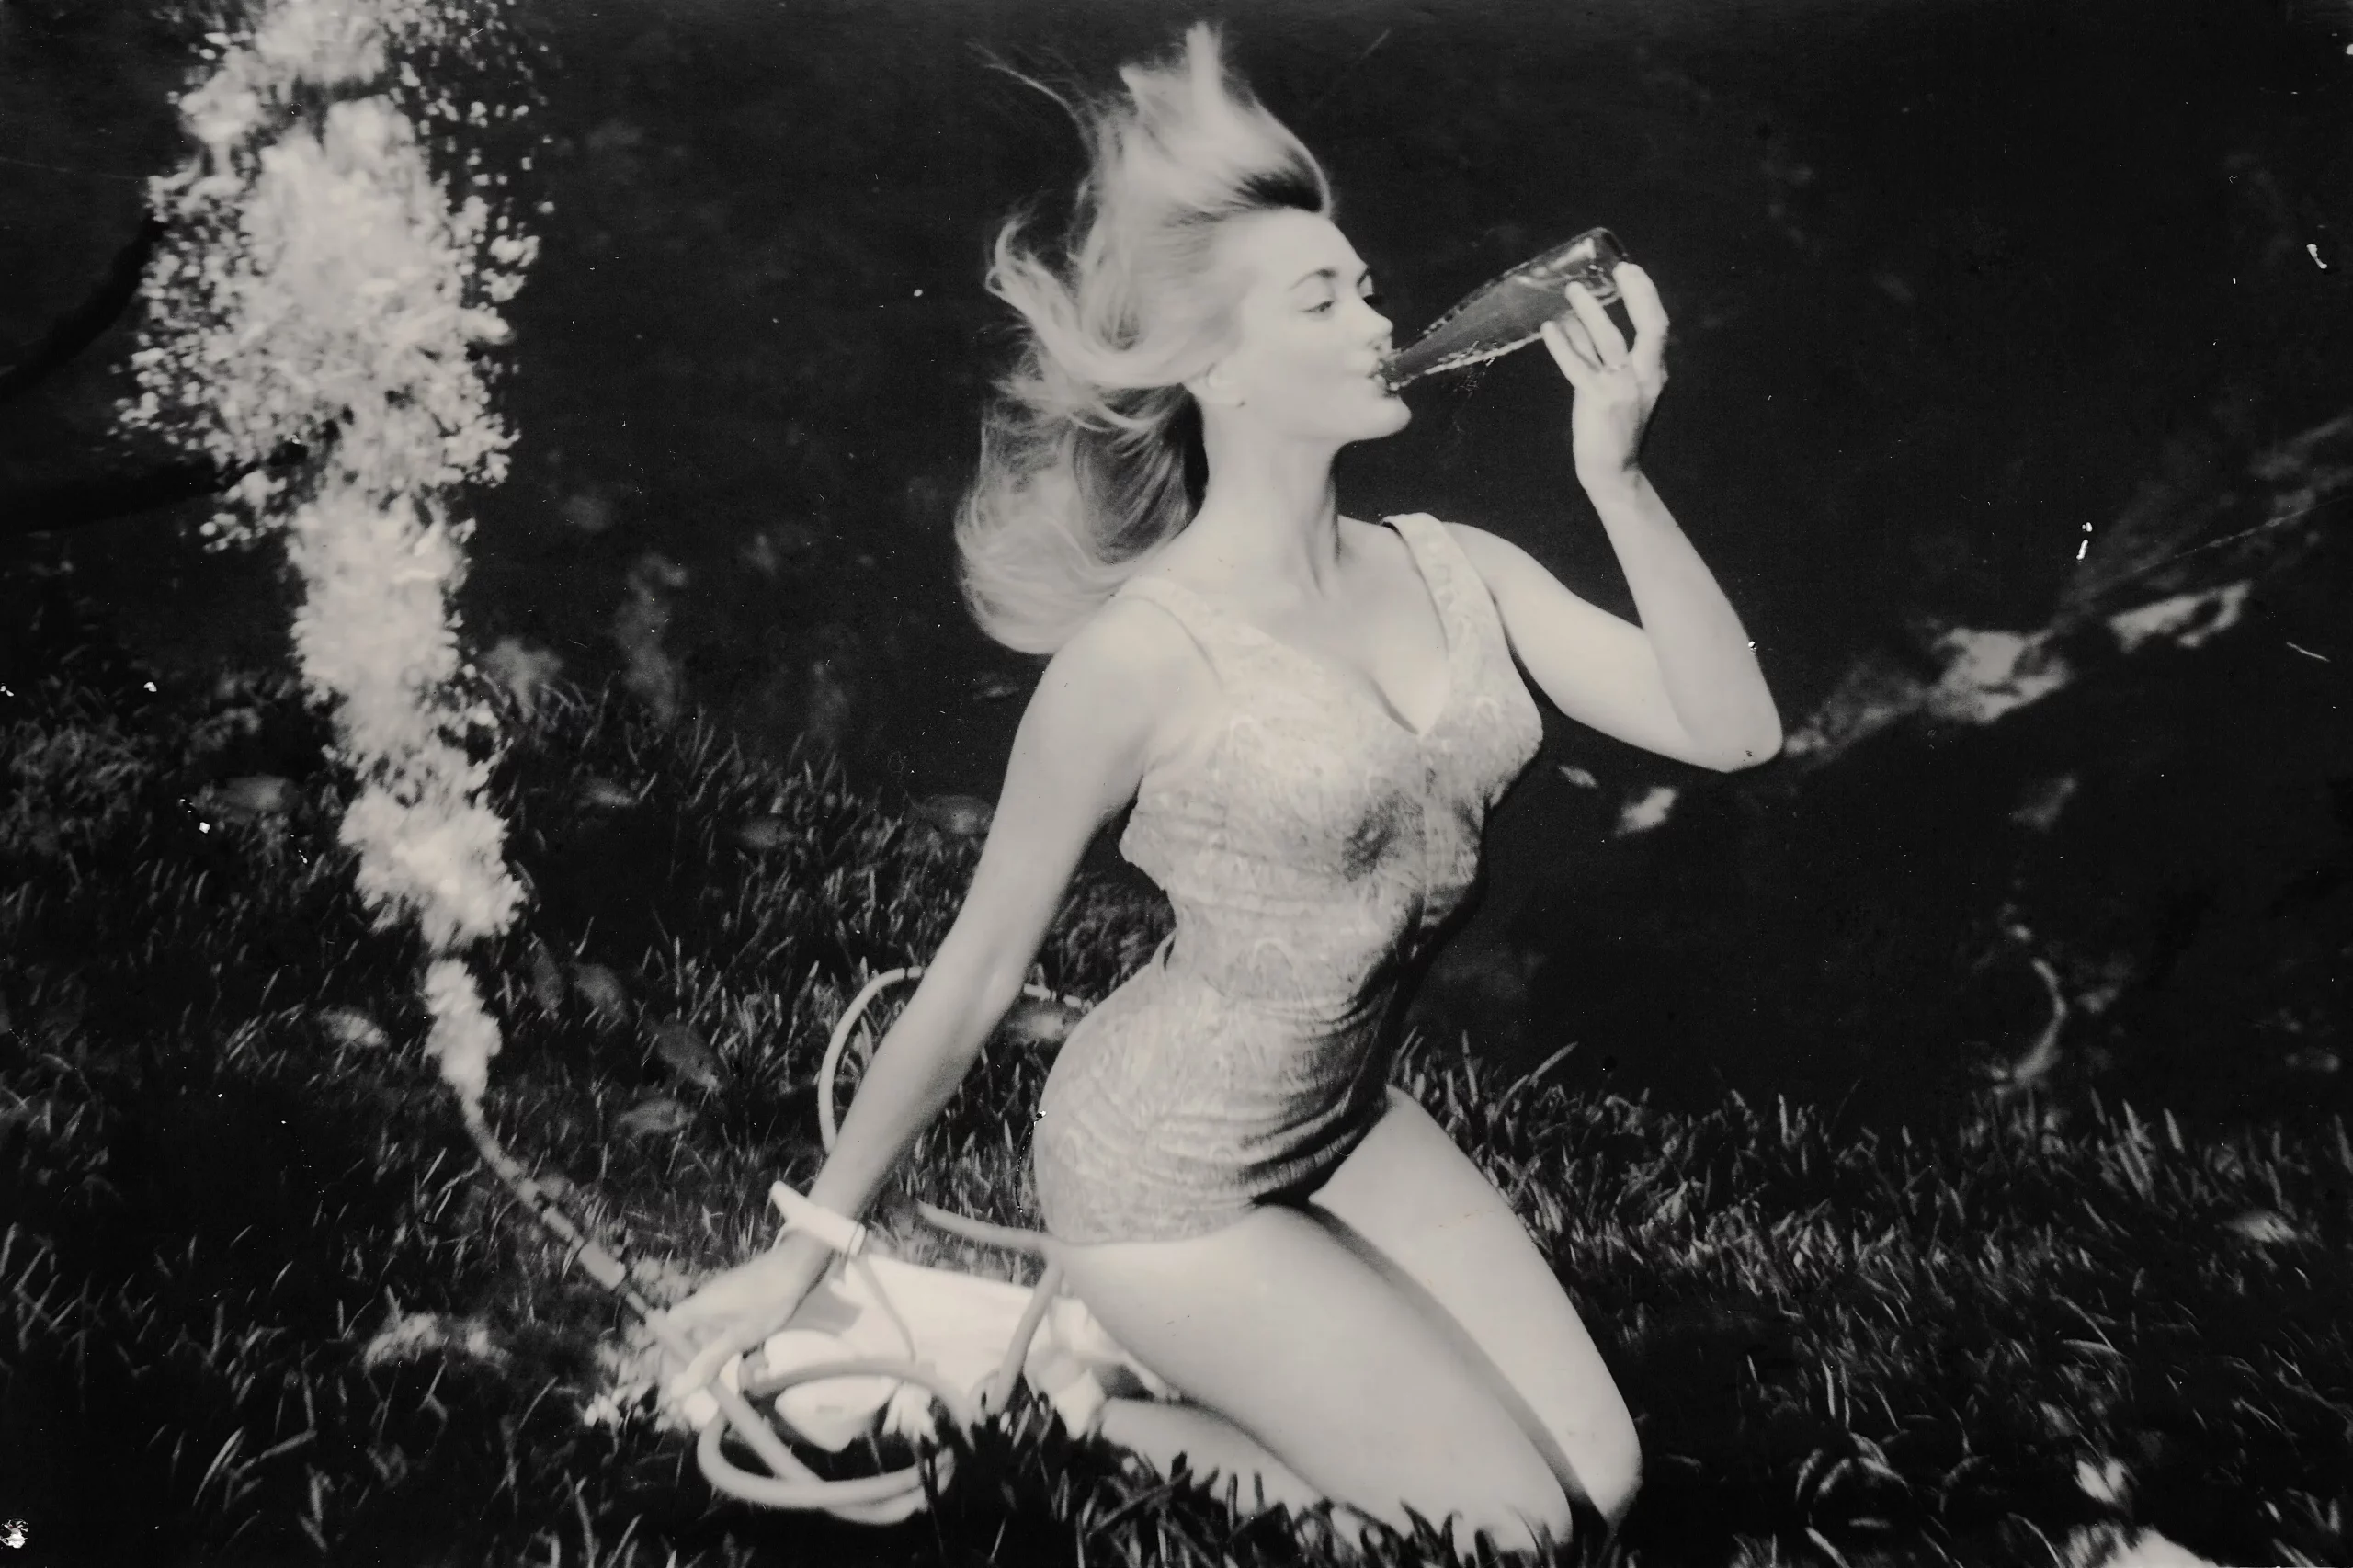 Black and white, a woman in a bathing suit blows into a bottle underwater with an air tube bubbling behind her